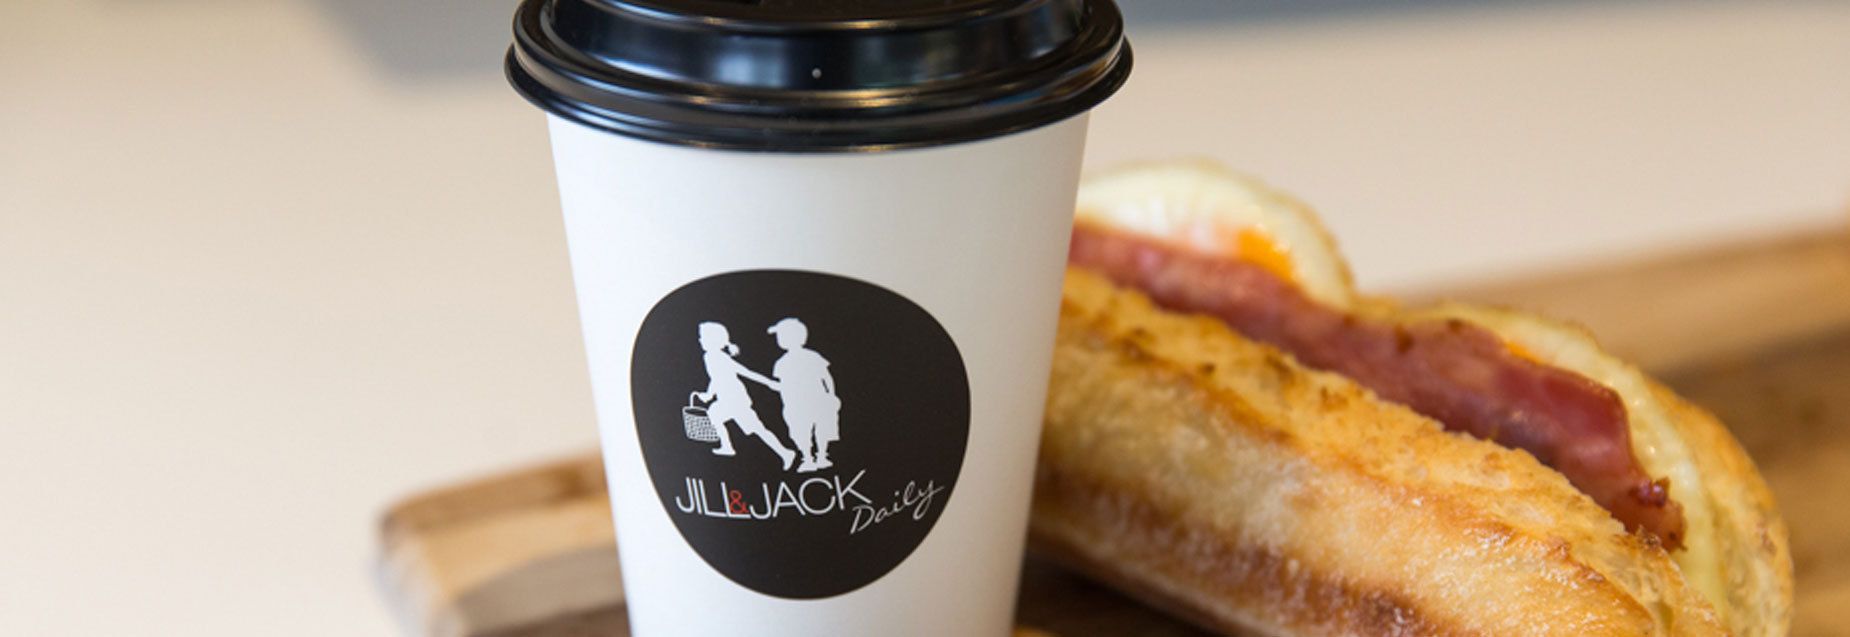 Jill and Jack coffee cup